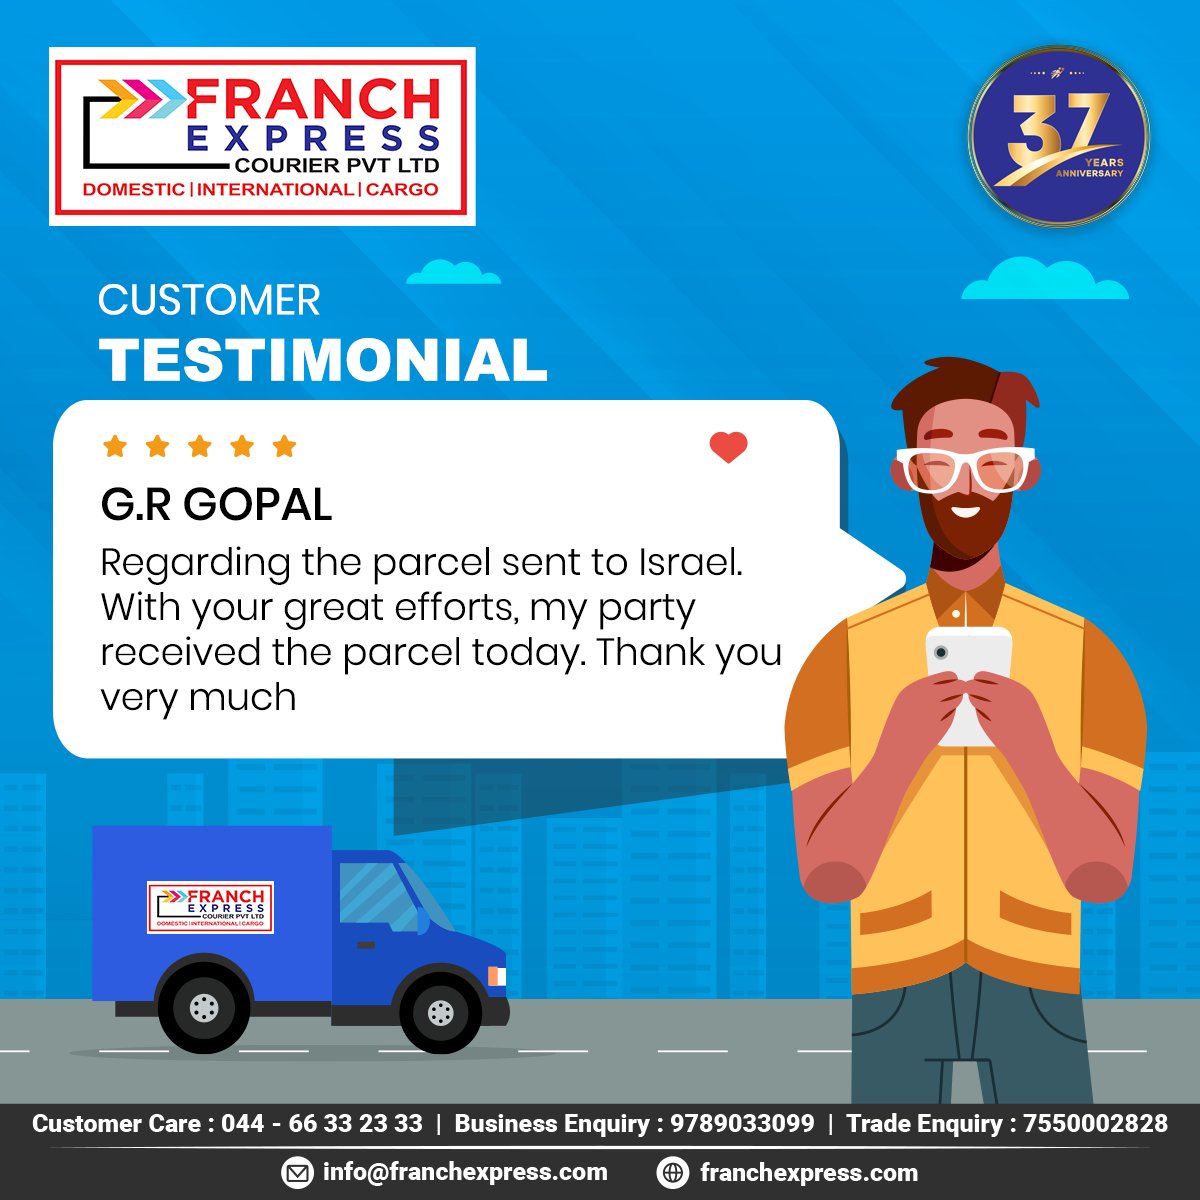 We are glad to hear from our happy customers. Take a look as G. R Gopal shares his experience with Franch Express! 

  #onetimedelivery #logisticsolutions #speedydelivery #package #samedaydelivery #speedyshipping #franchexpress #courierexcellence #onlinedelivery #courierservice